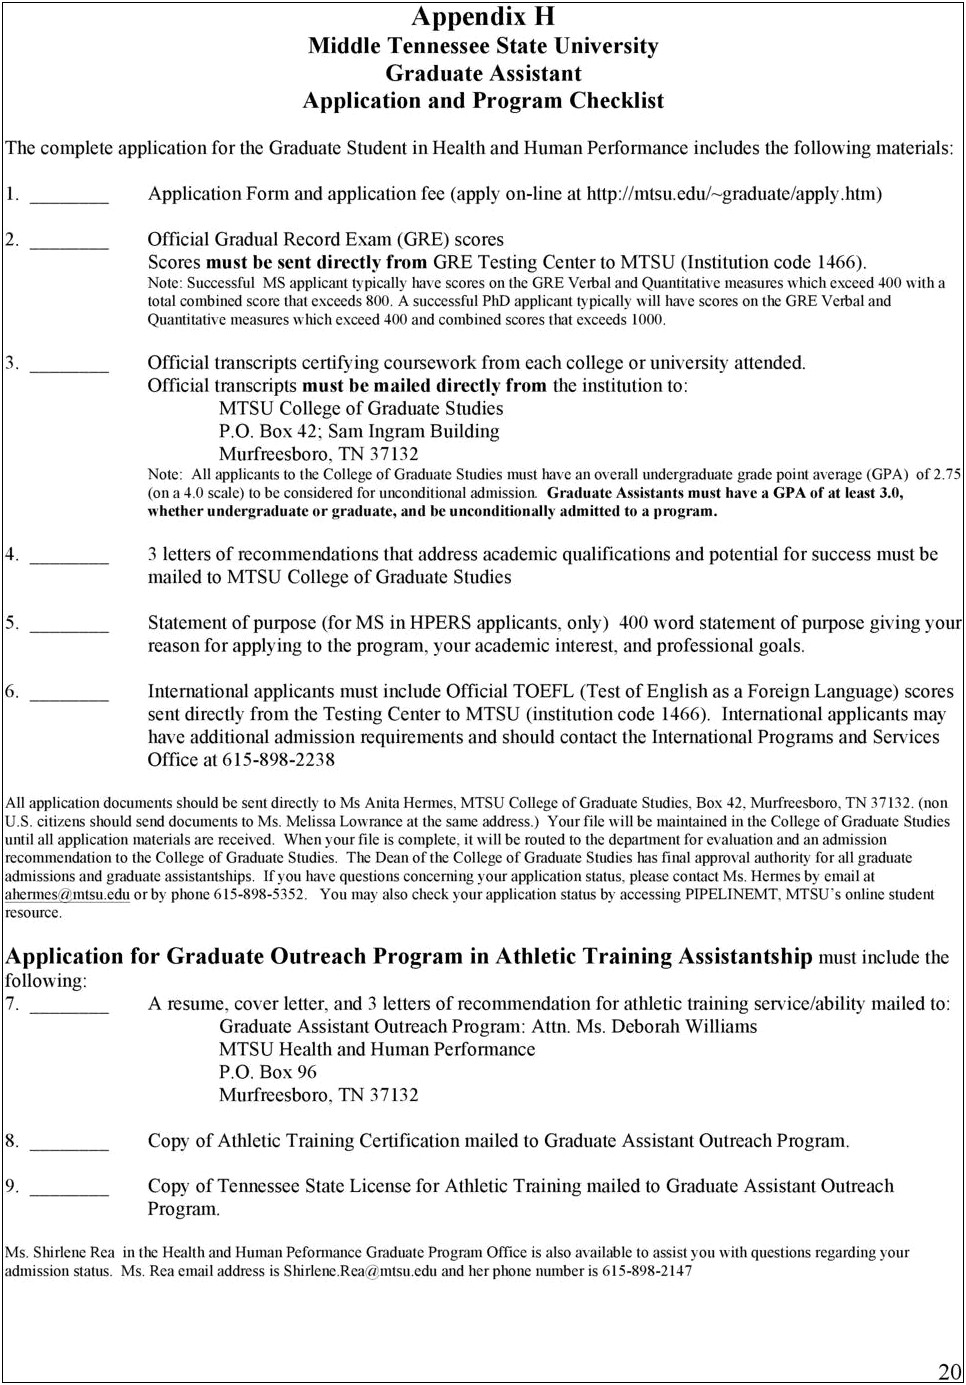 Cover Letter Template For Athletic Graduate Asisstant